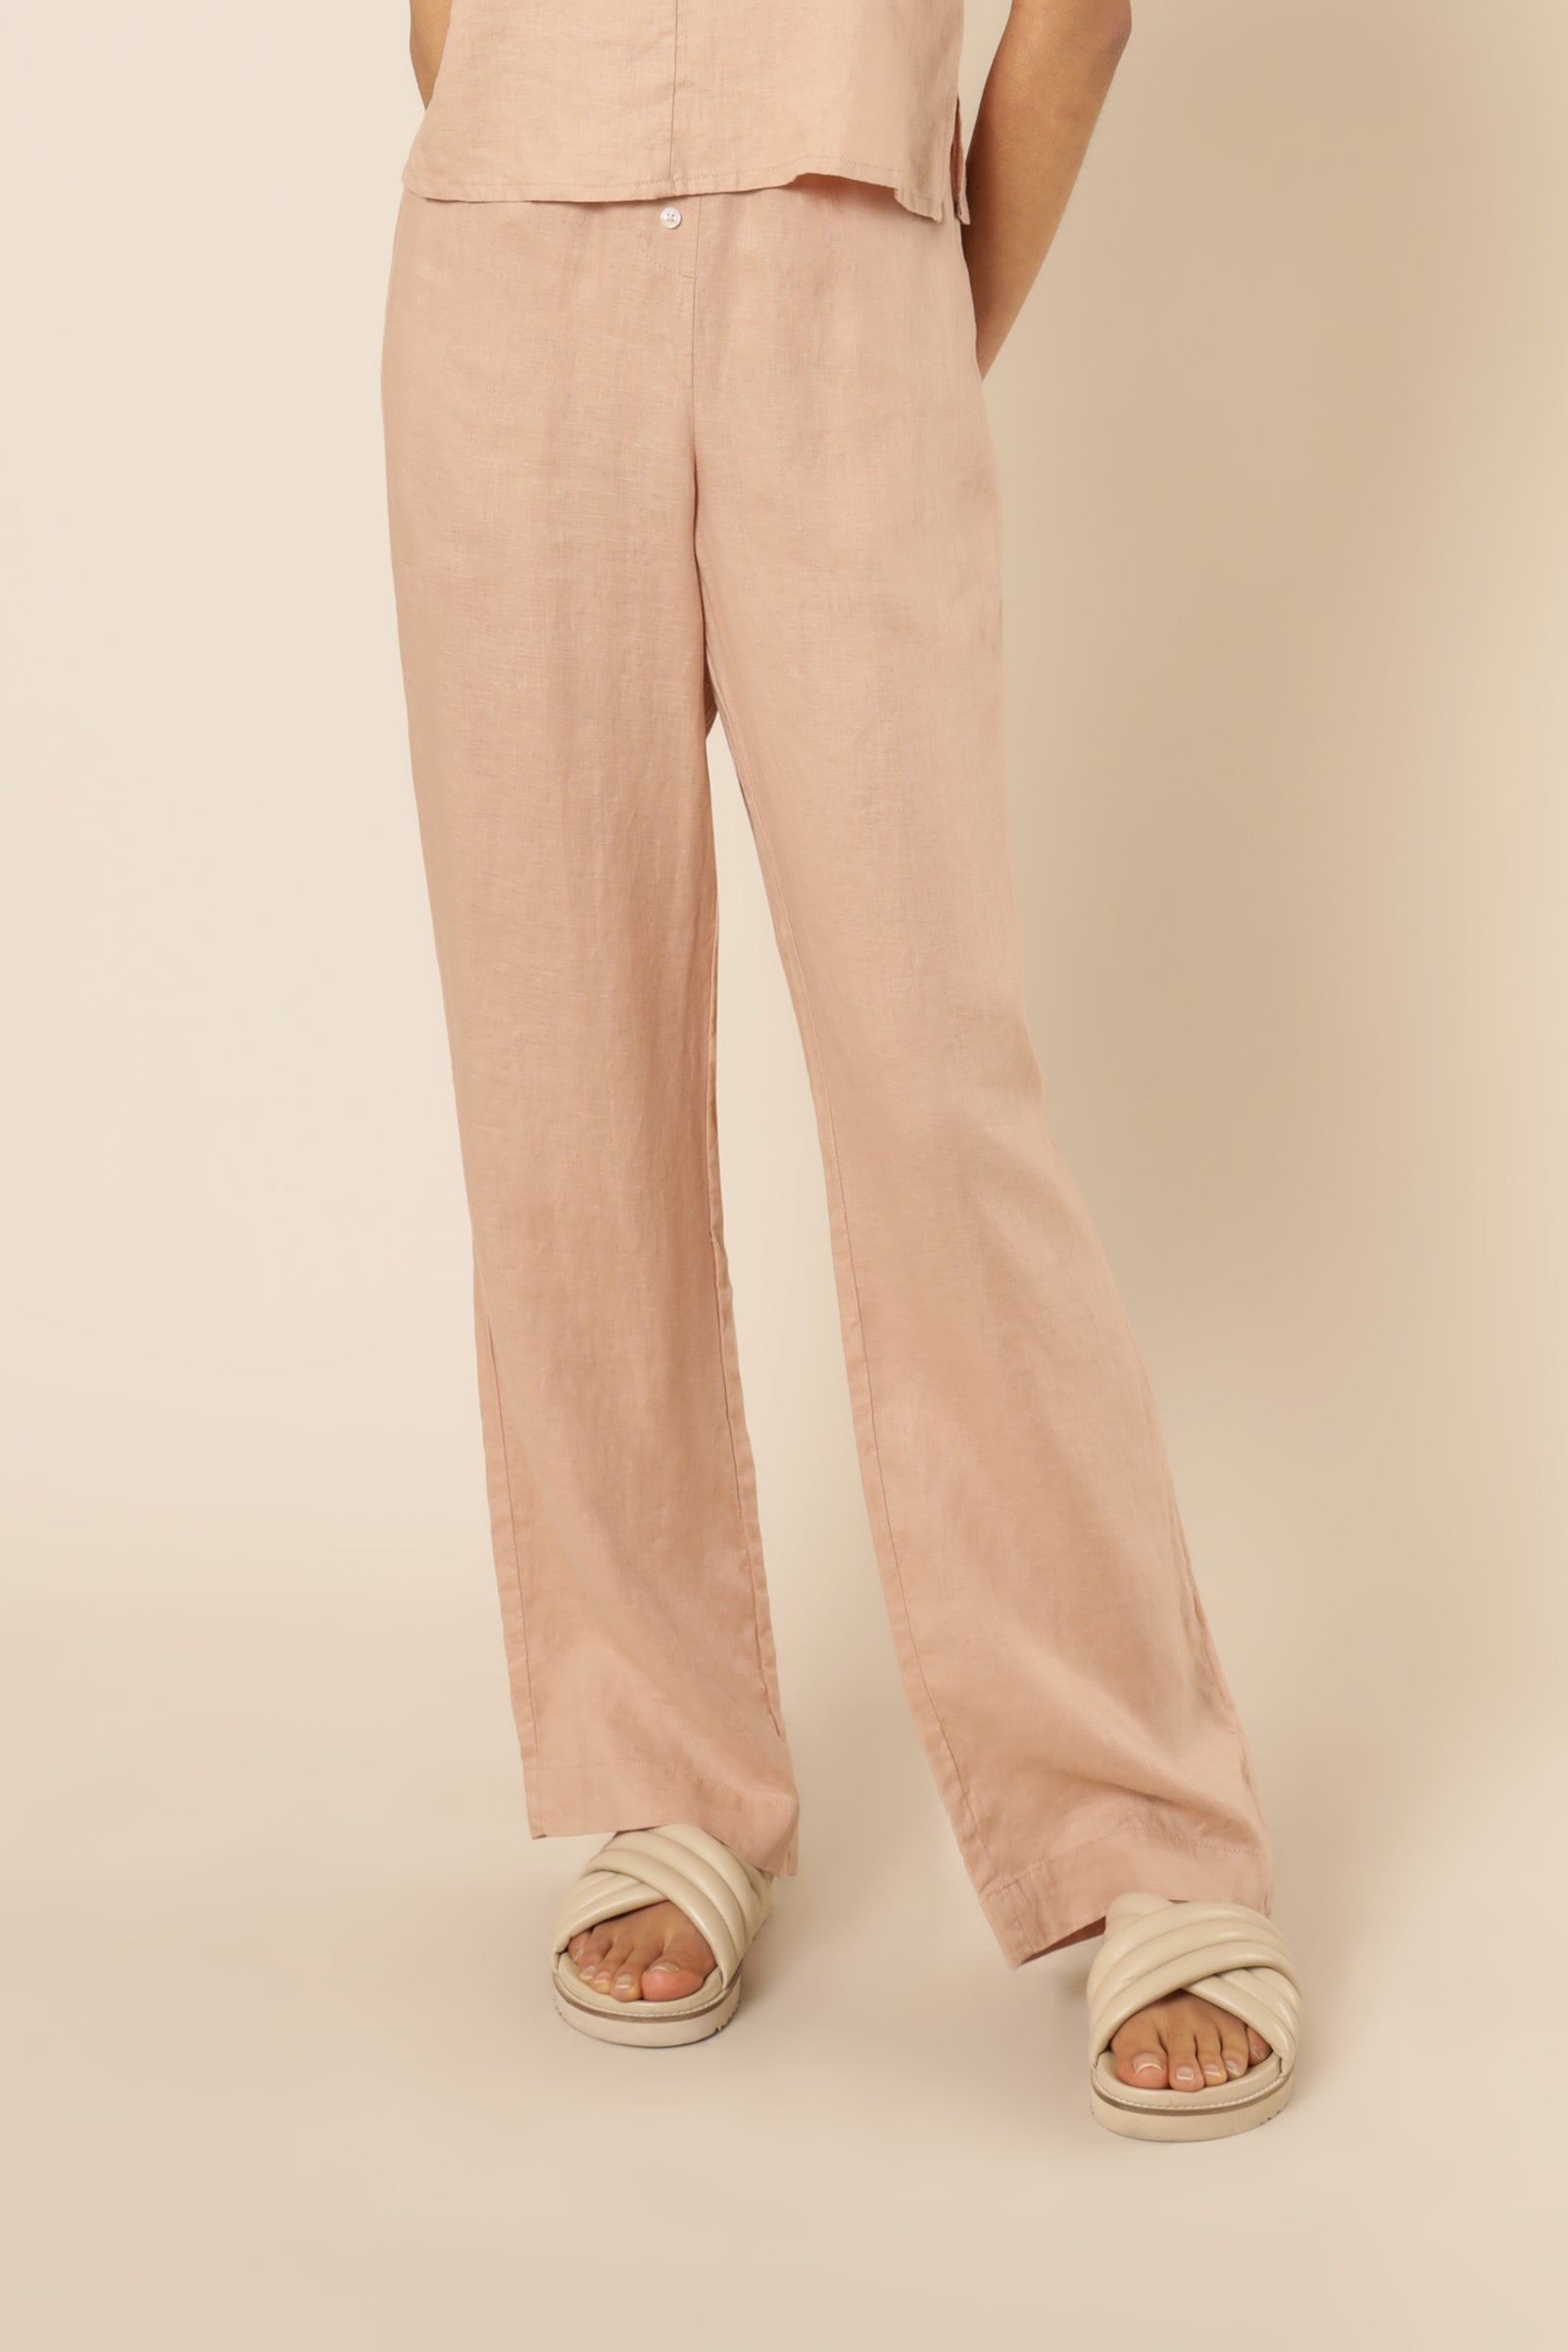 Nude Lucy Nude Linen Lounge Pant Clay Pants 